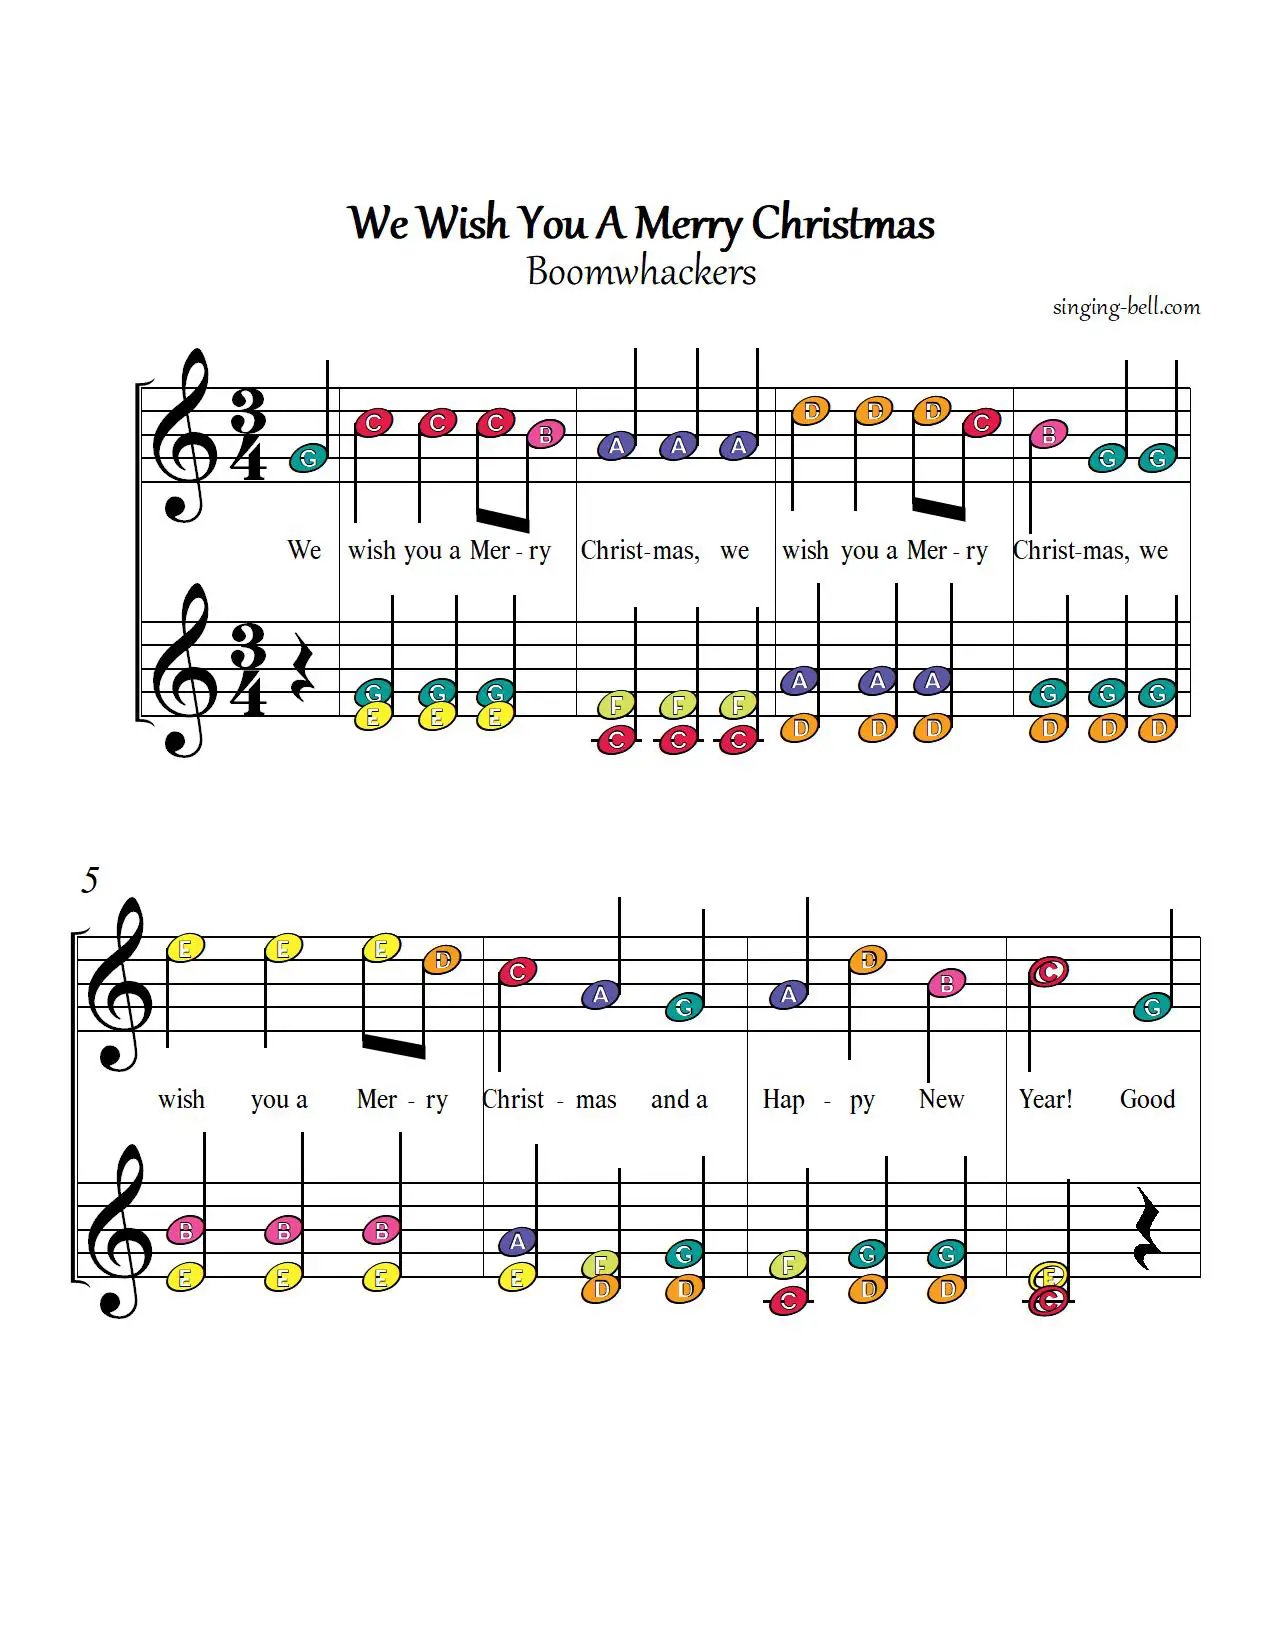 We wish you a merry Christmas free boomwhackers handbells chords sheet music color notes chart pdf p.1